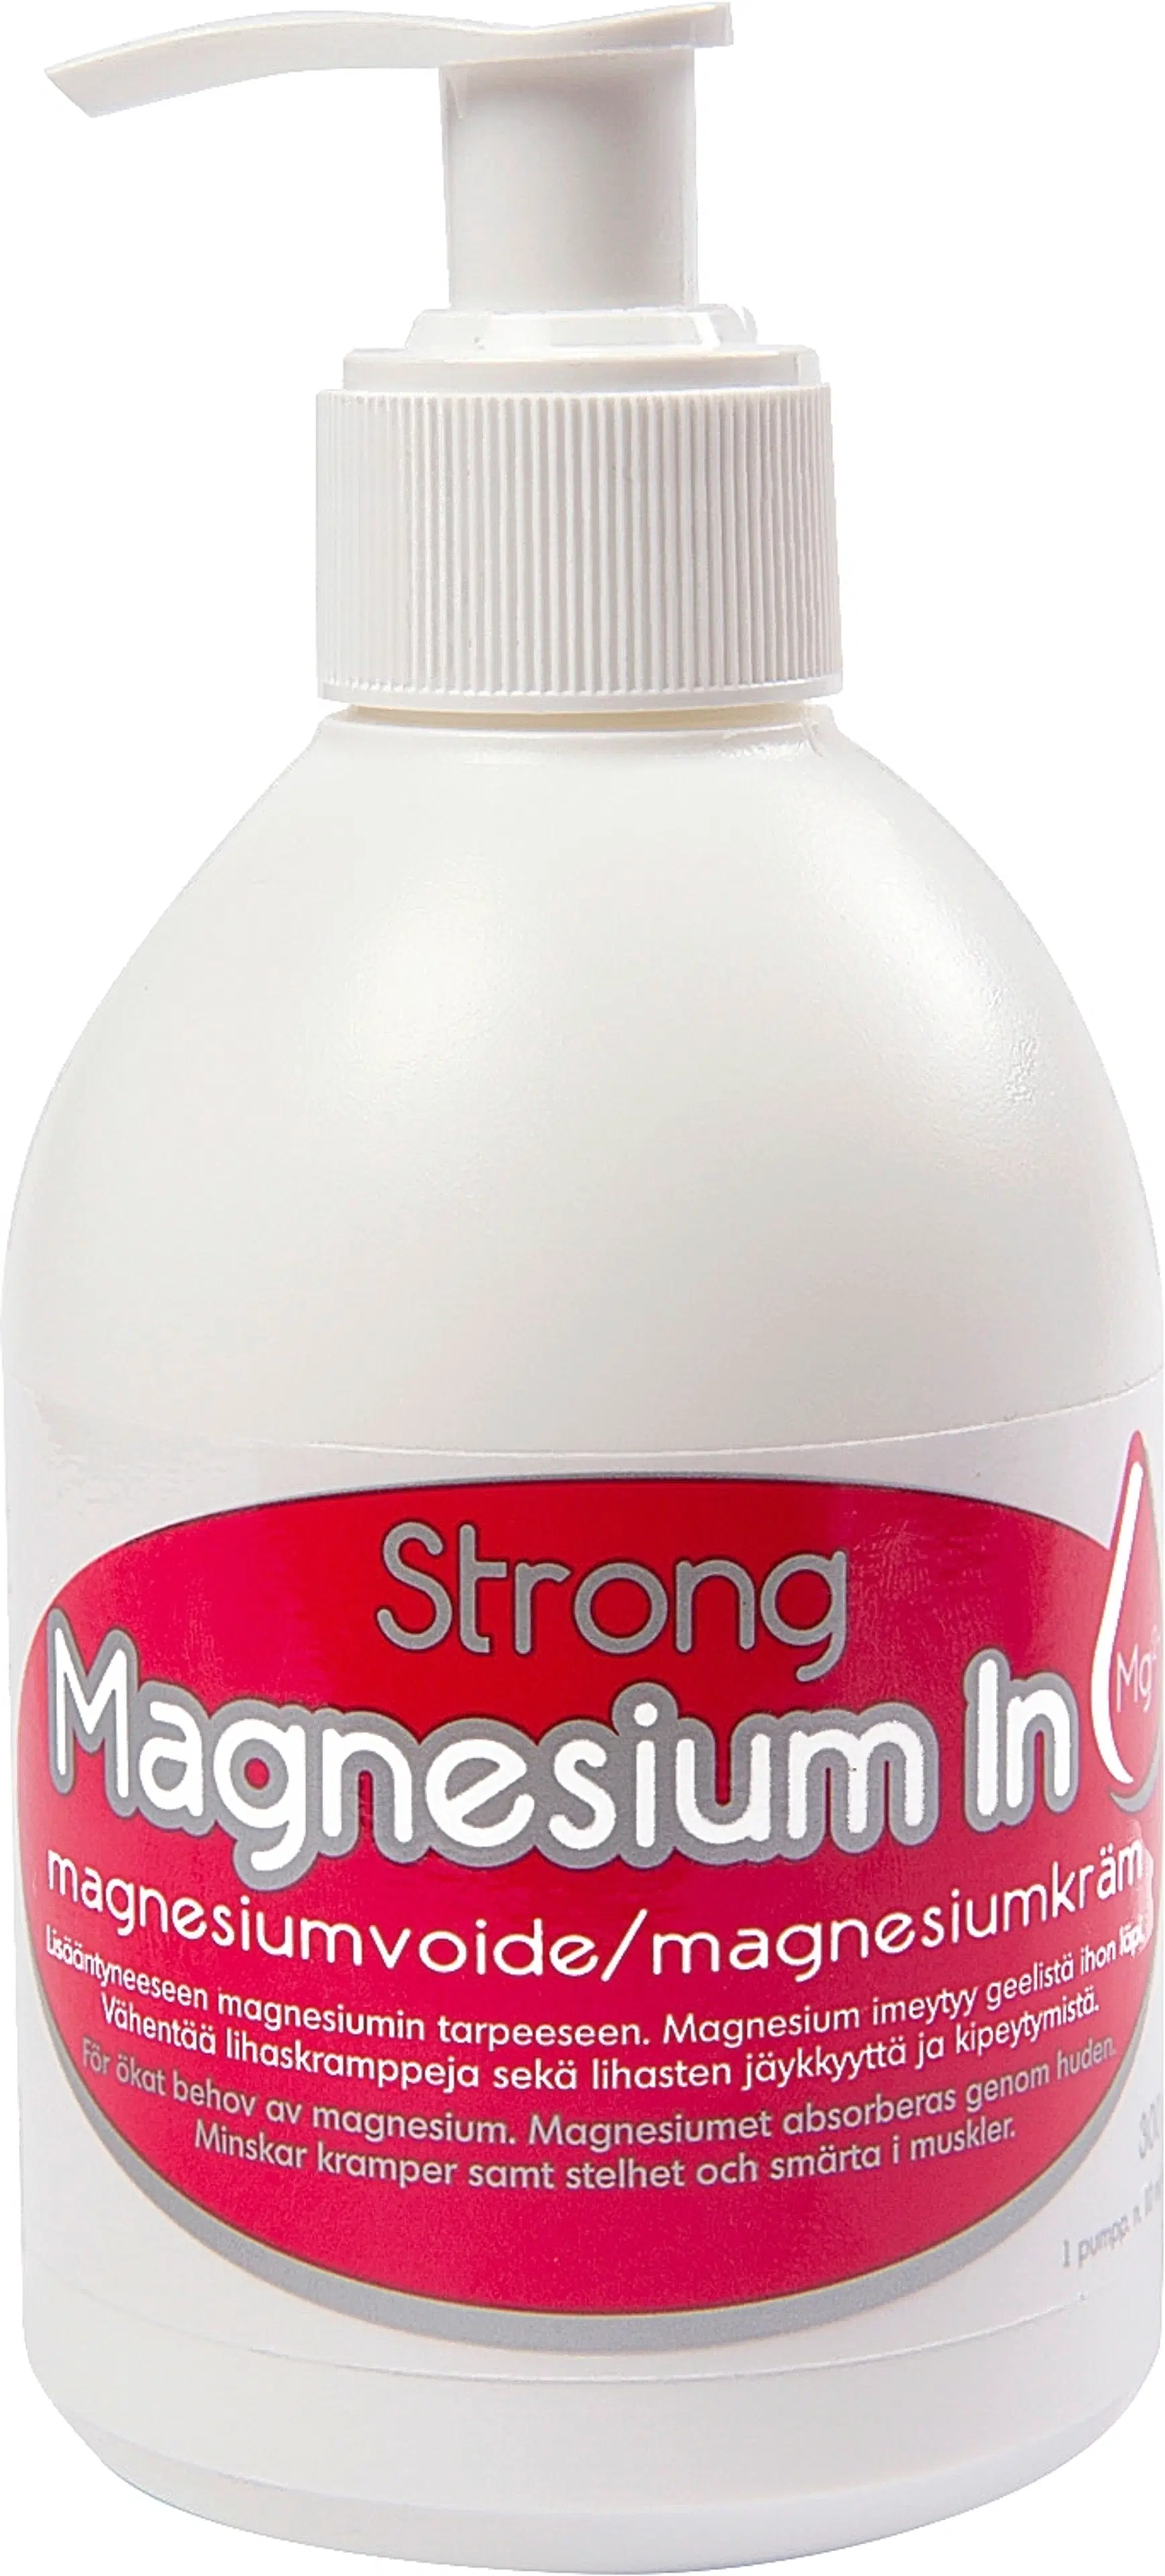 Magnesium In, Strong, magnesiumvoide